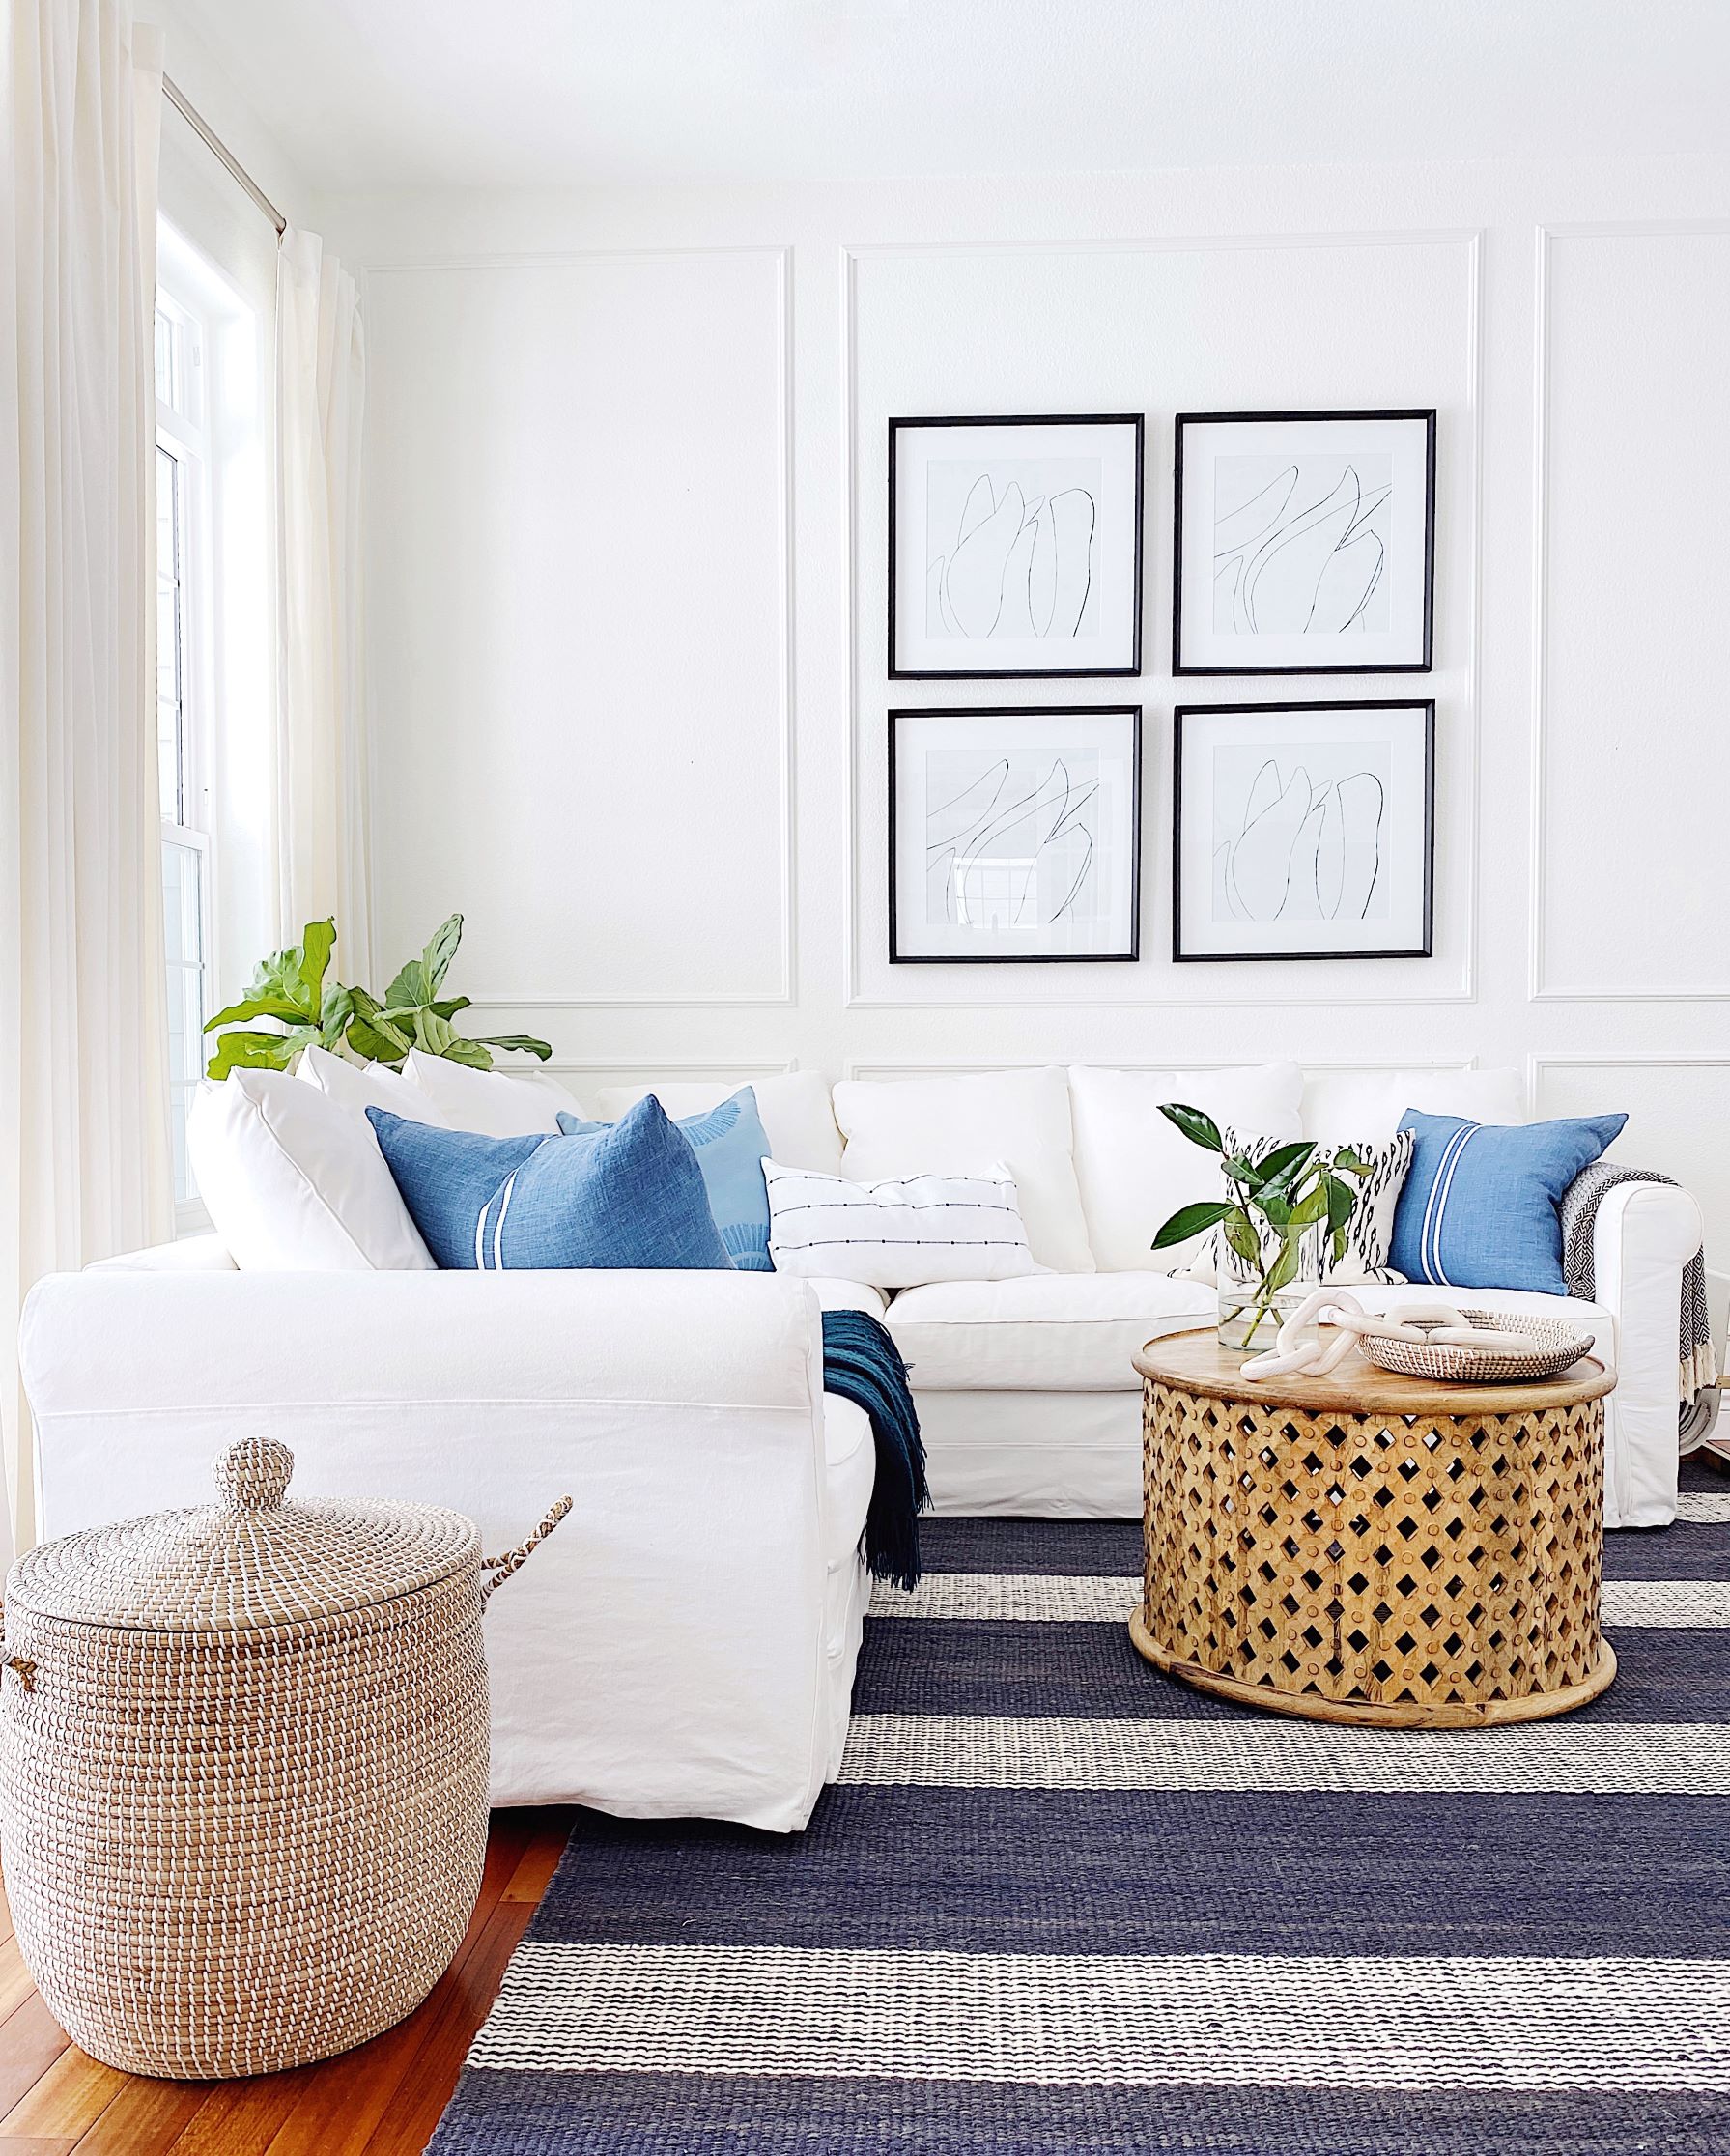 Blue and white in the living room with a jute rug, black framed artwork and panel molding trim on the walls - jane at home #livingroom #livingroomdecor #coastaldecor #coastalstyle #livingroomideas